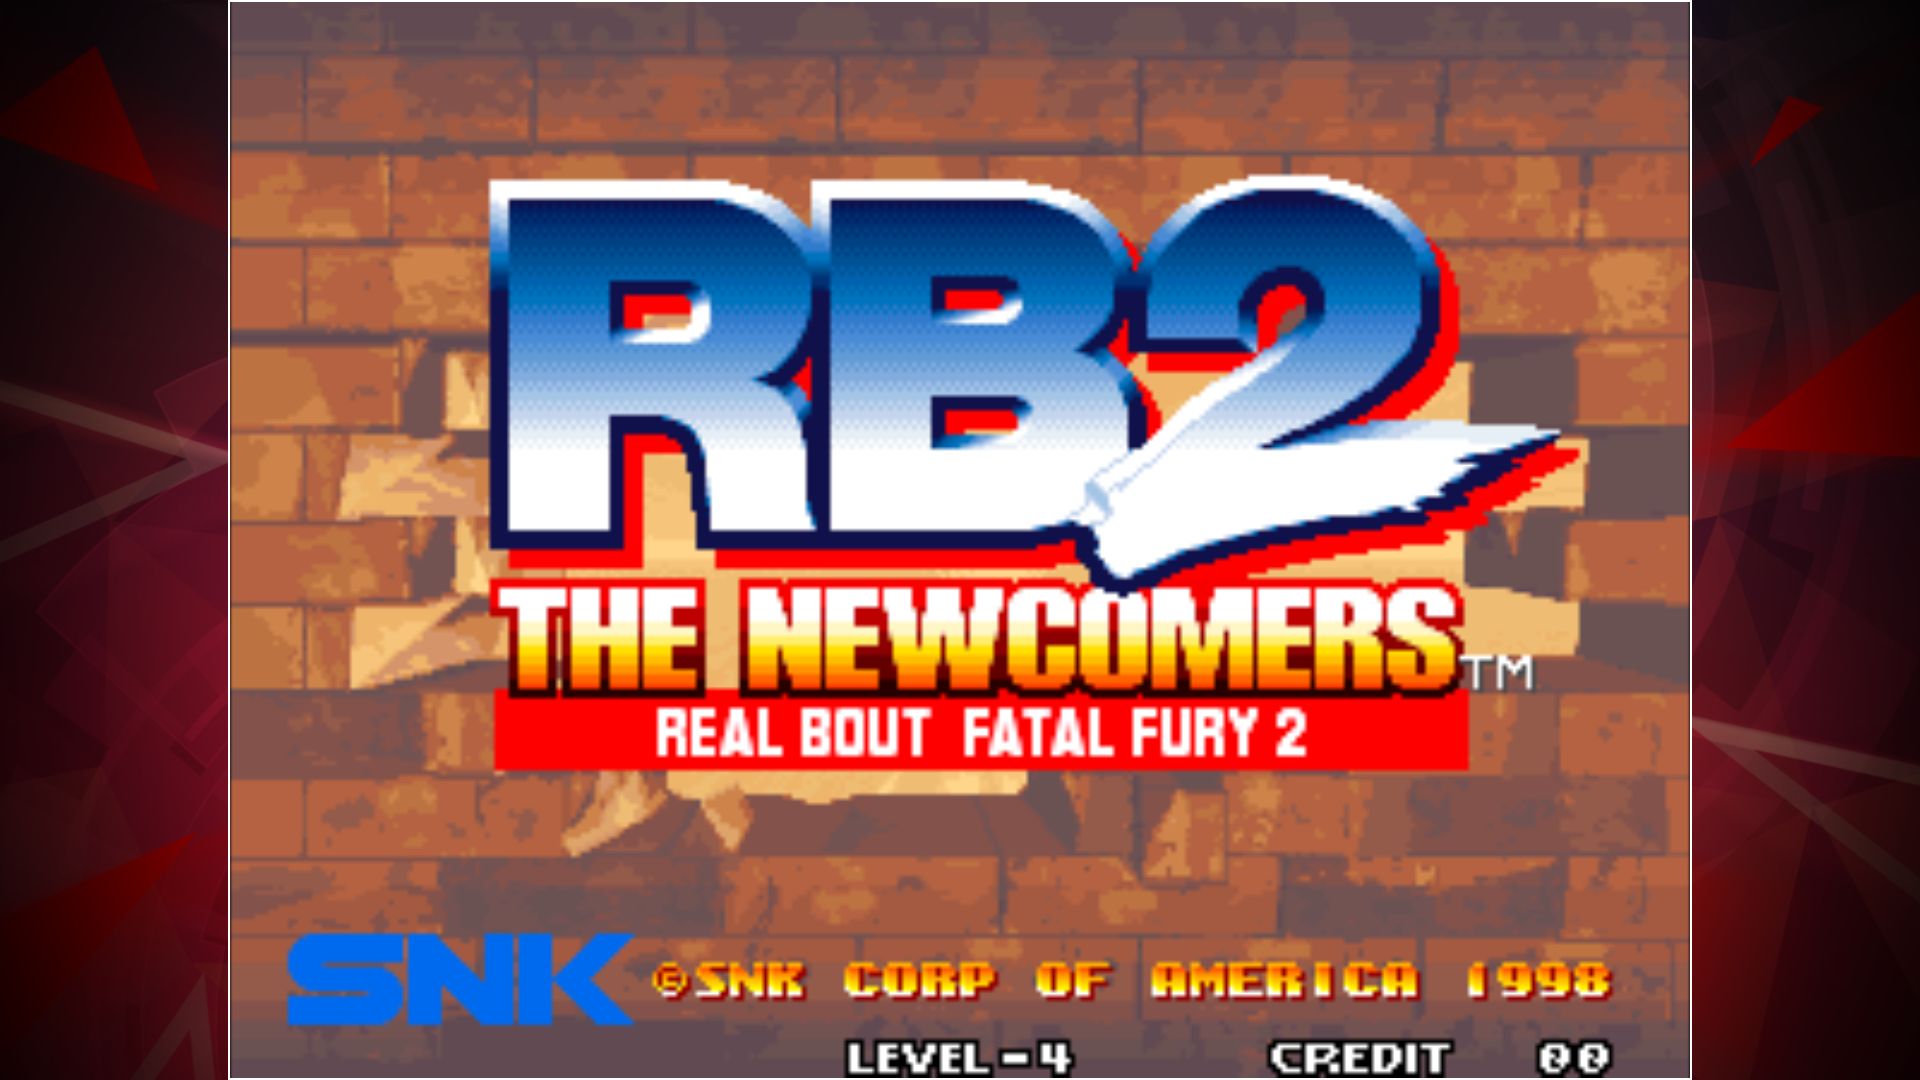 Download REAL BOUT FATAL FURY 2 für Android kostenlos.